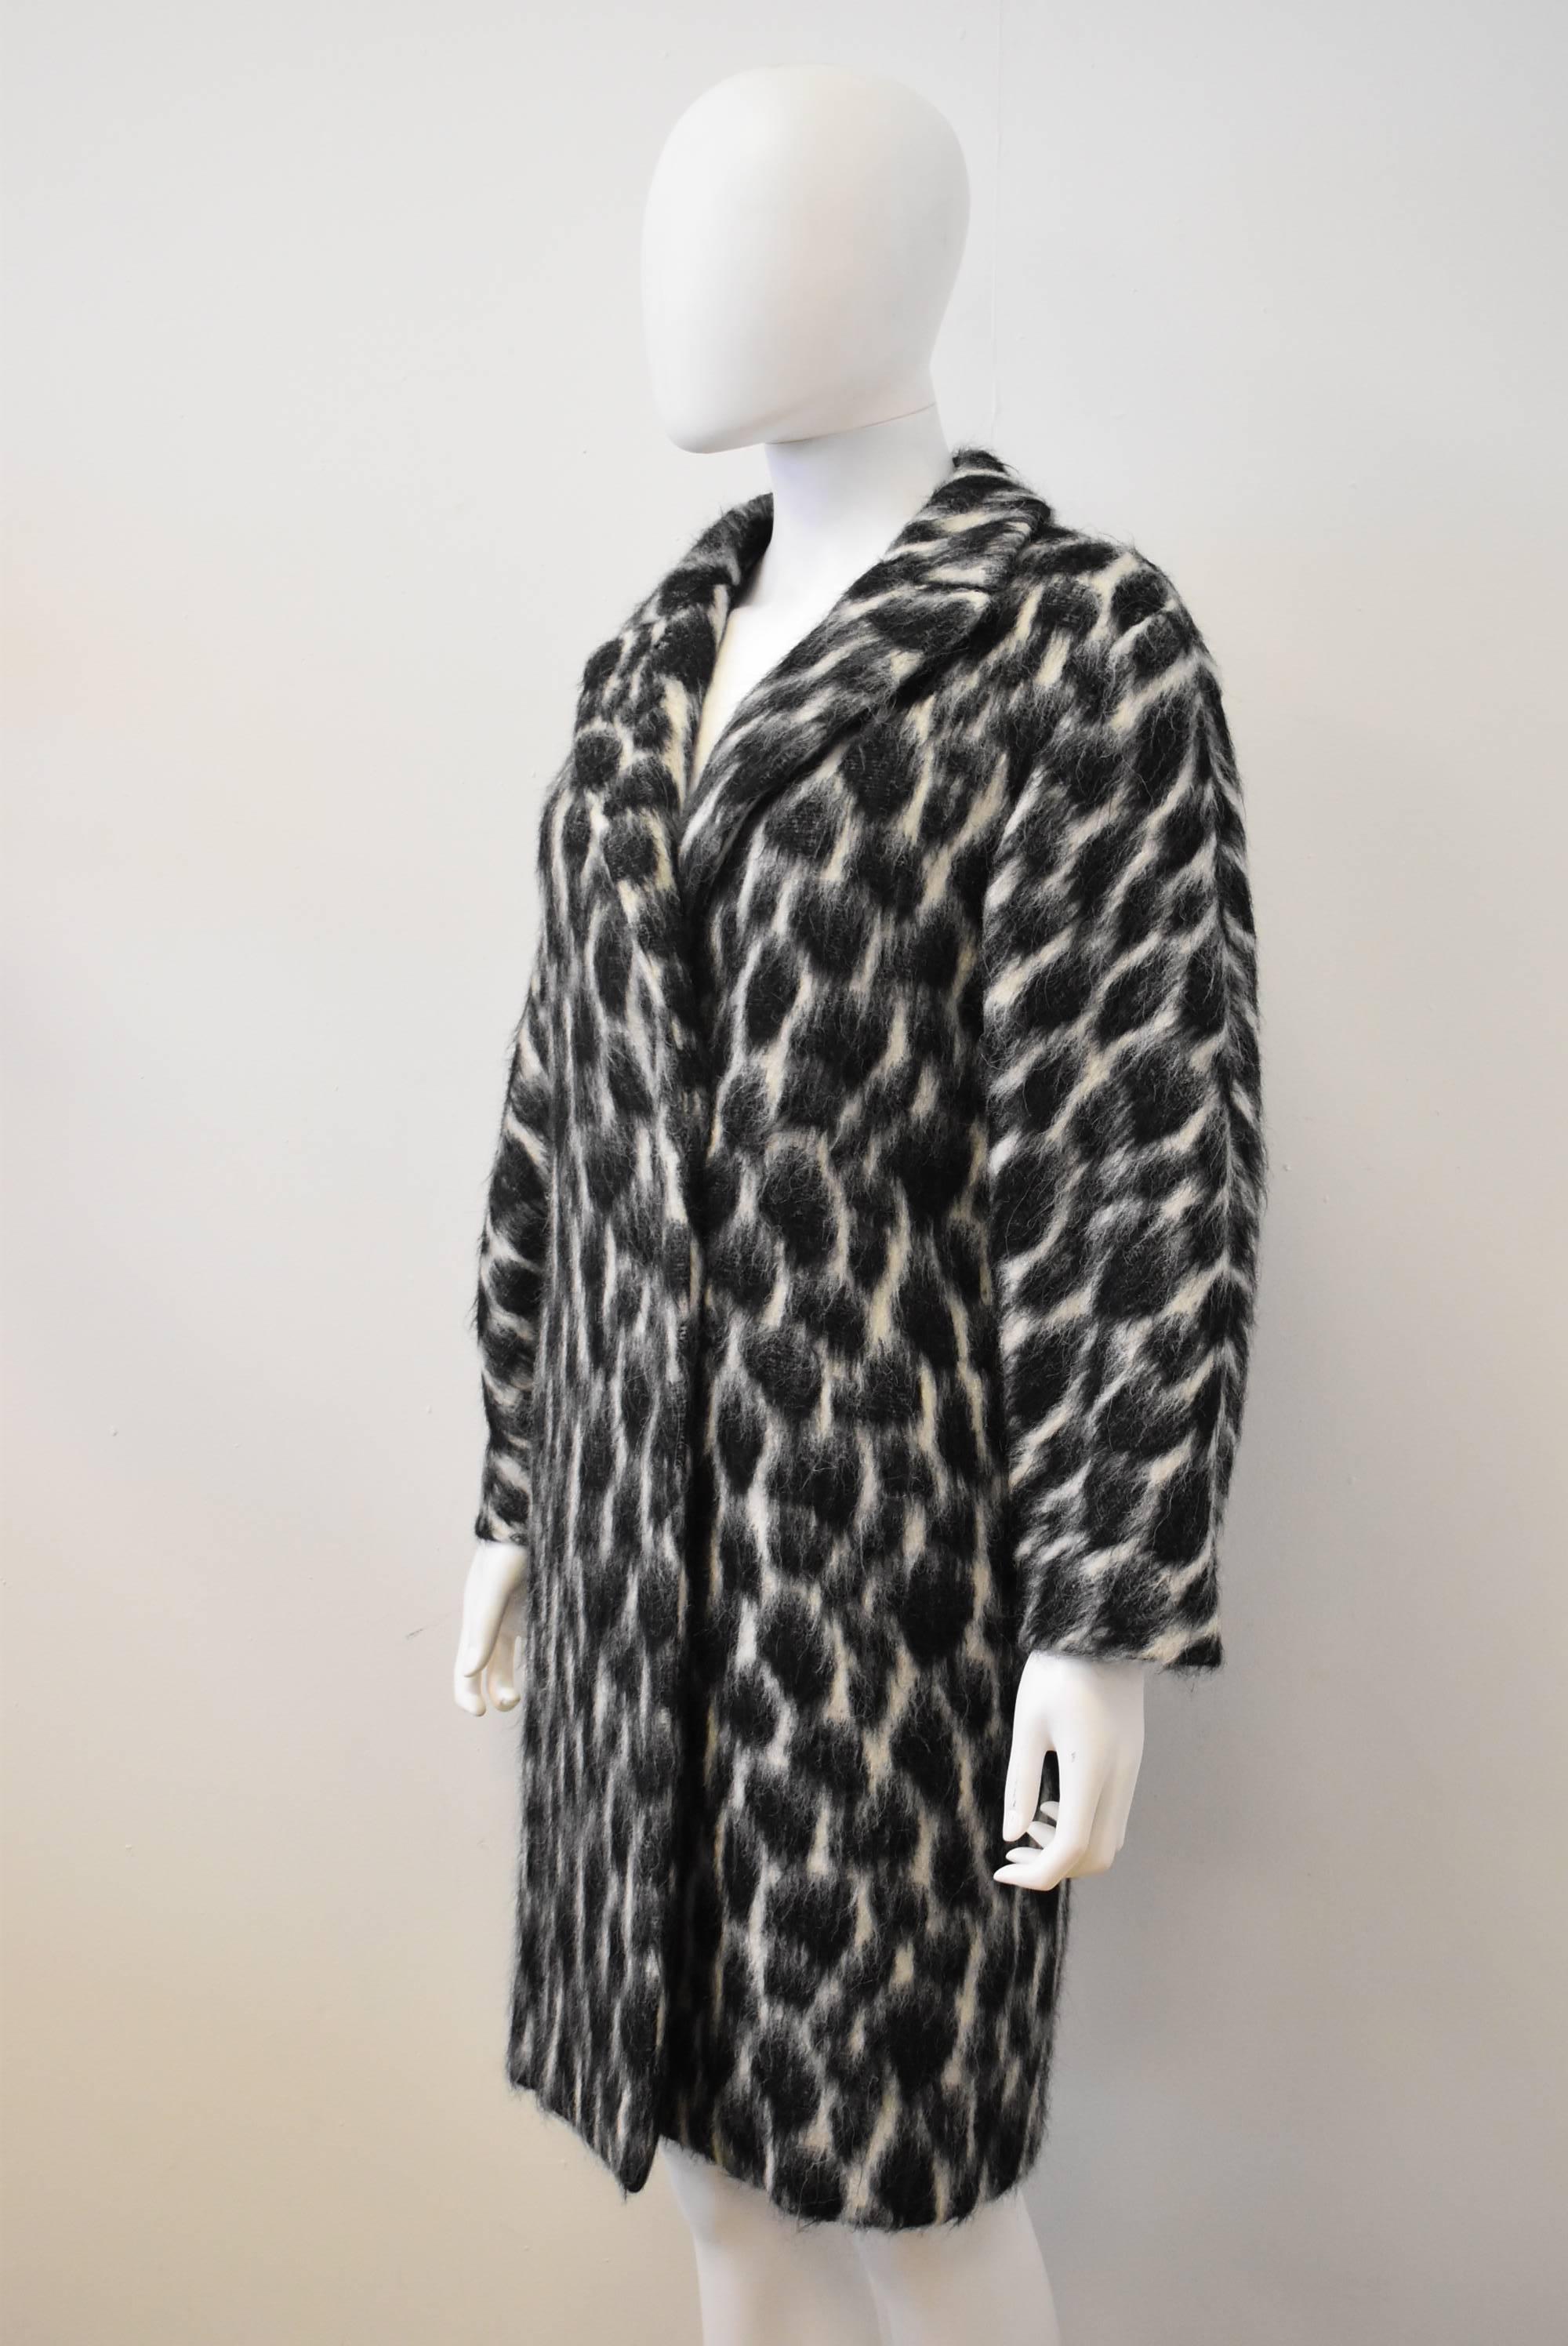 A luxurious black and white animal print coat by Gucci. The coat is made from a blend of Alpaca and Mohair which gives the coat a beautiful and unusual texture. The coat falls to just above knee length and is perfect to keep you warm during the